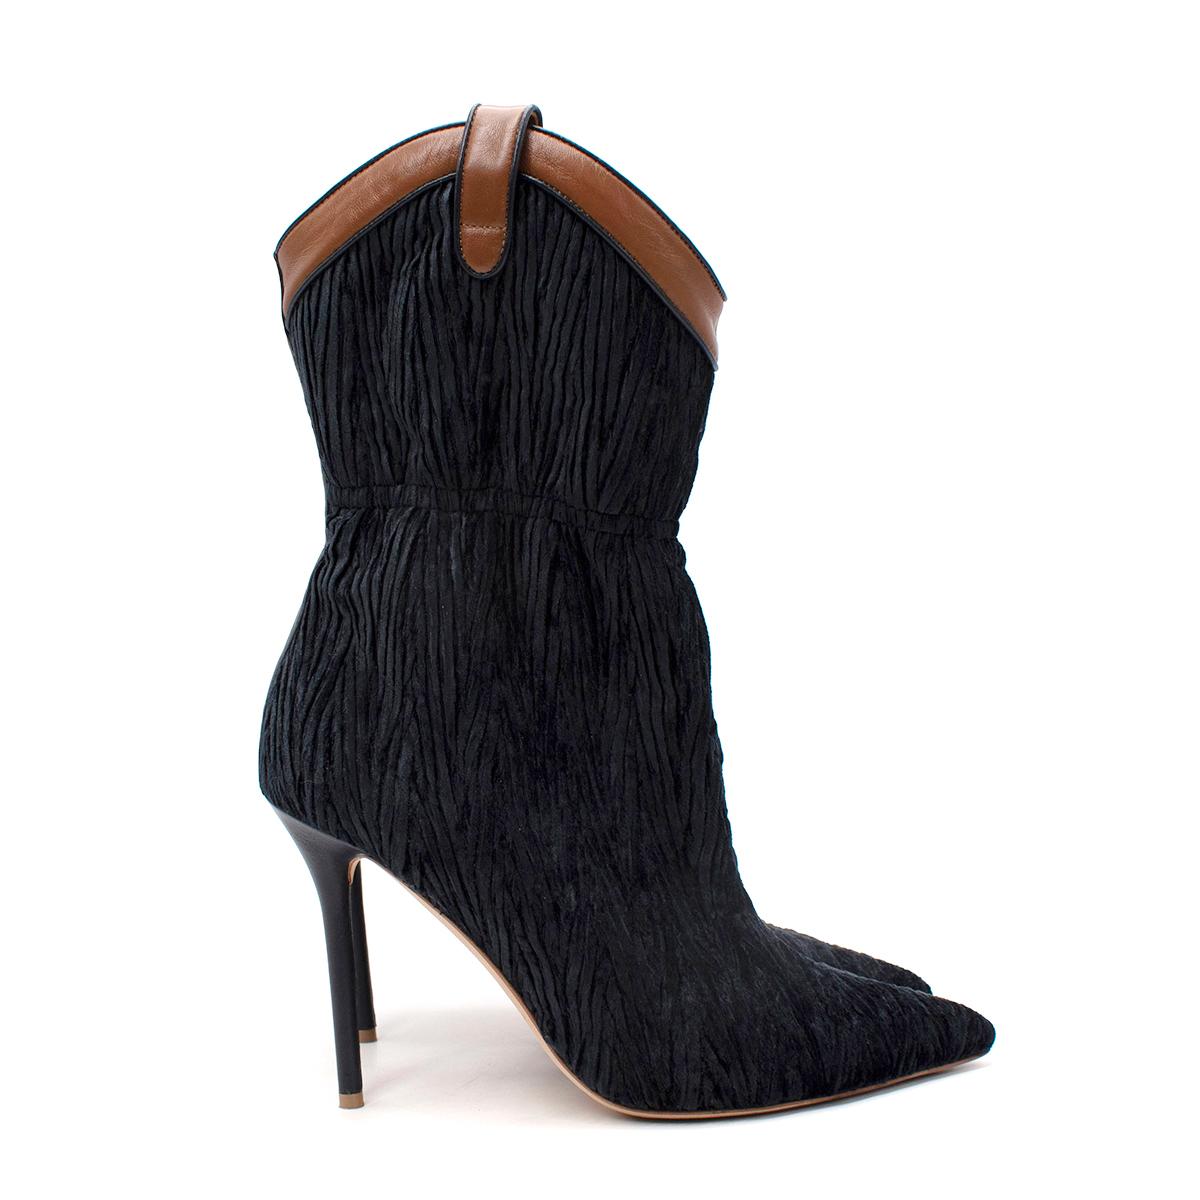 Malone Souliers Daisy Deep Navy Velvet & Leather Heeled Ankle Boots

- Crafted from a deep navy, almost black corduroy velvet, with a rich tan trim, these boots feature a sharply pointed toe, and a nod to western style with a ruched ankle detail,